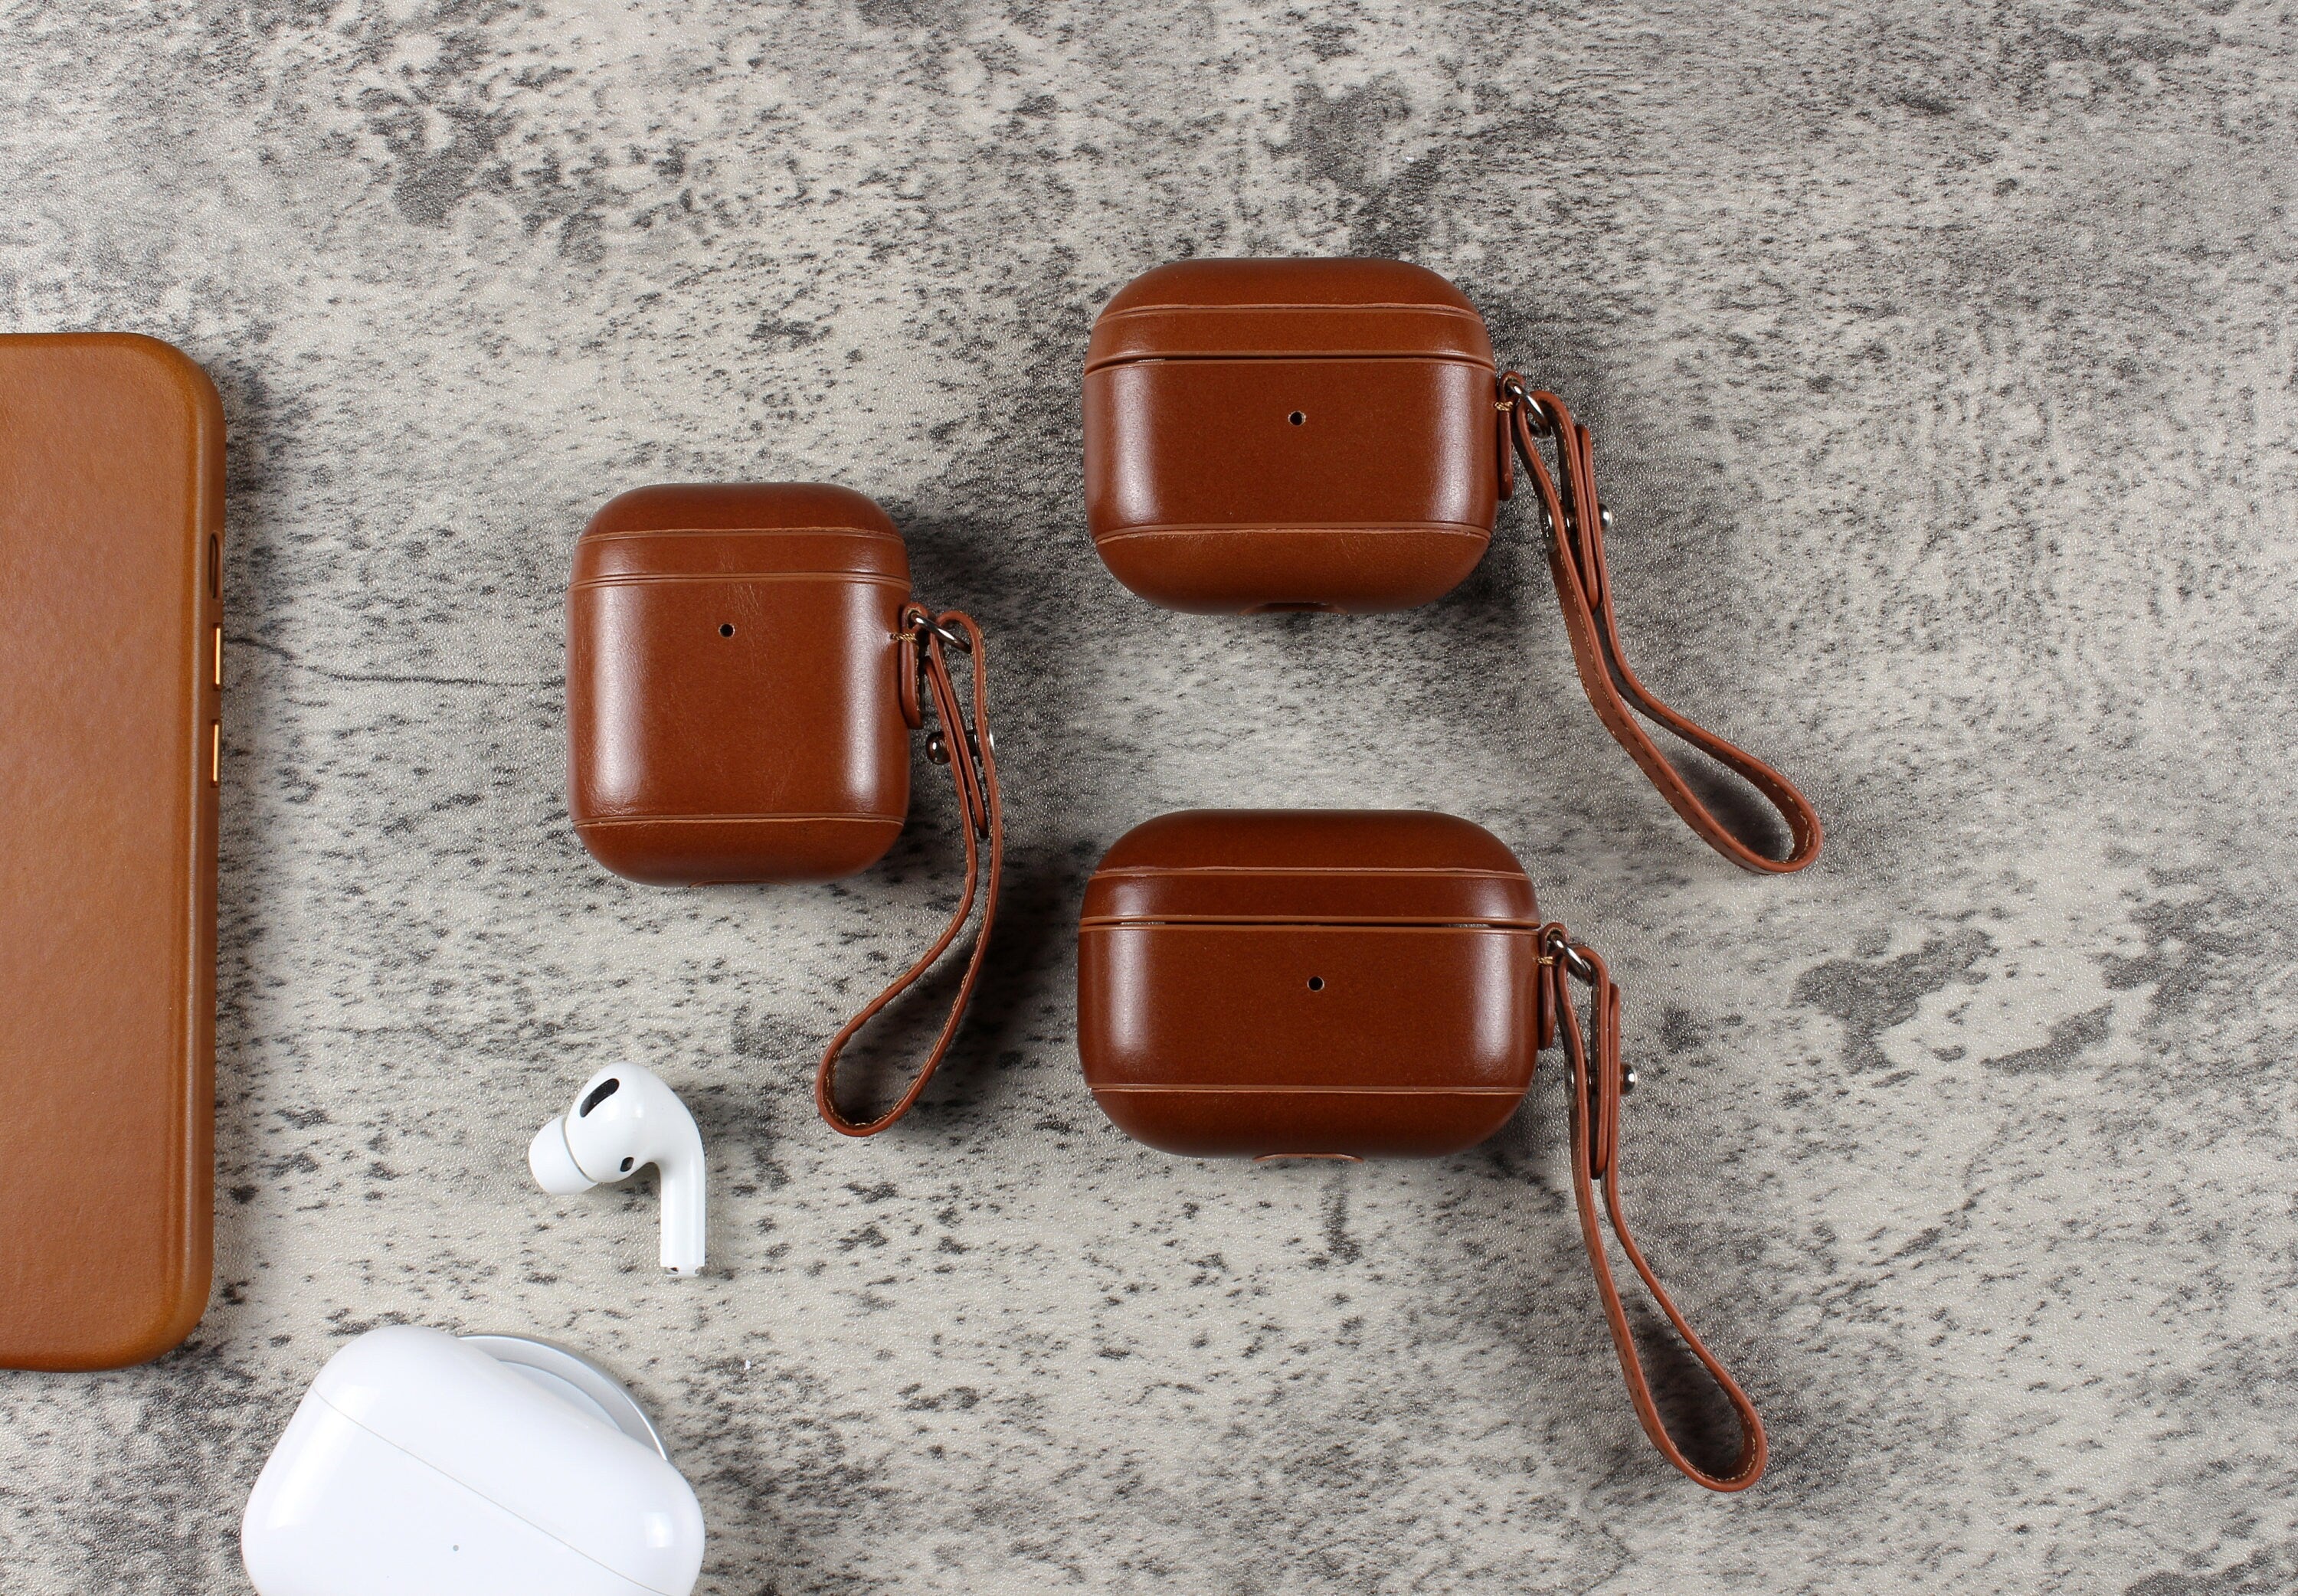 Personalized Genuine Leather AirPods Generation 1/2/Pro/3 Case Support Wireless Charging